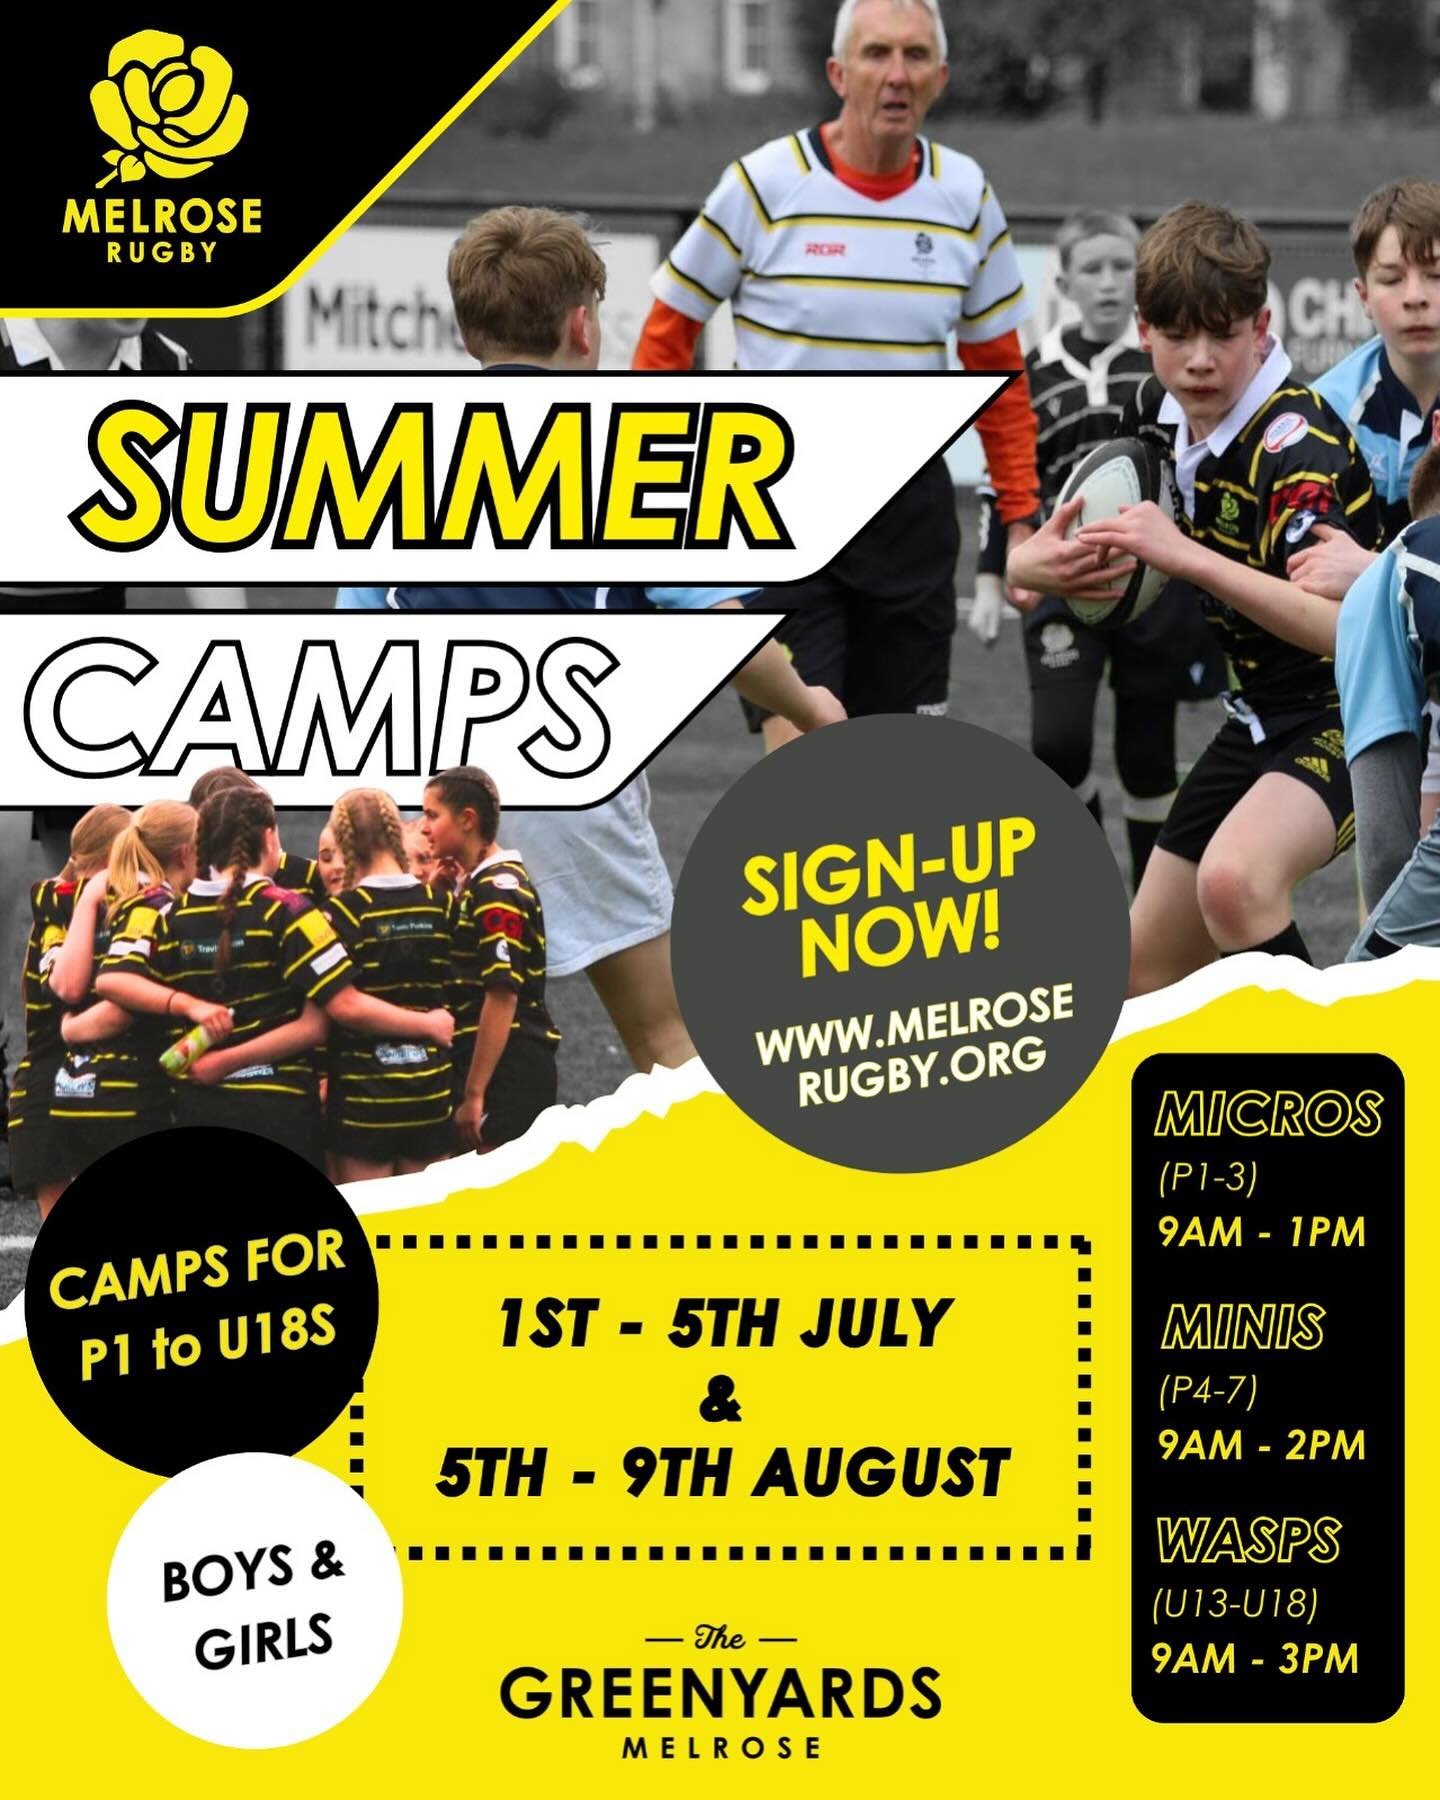 MELROSE RUGBY CAMPS ARE LIVE FOR BOOKING ⬇️ 

July Camp - Monday 1st - Friday 5th July
Pre-Season Camp - Monday 5th August - Friday 9th August

Primary School aged Hornets &amp; Queen Bees will develop their Core Skills &amp; Game Intelligence throug